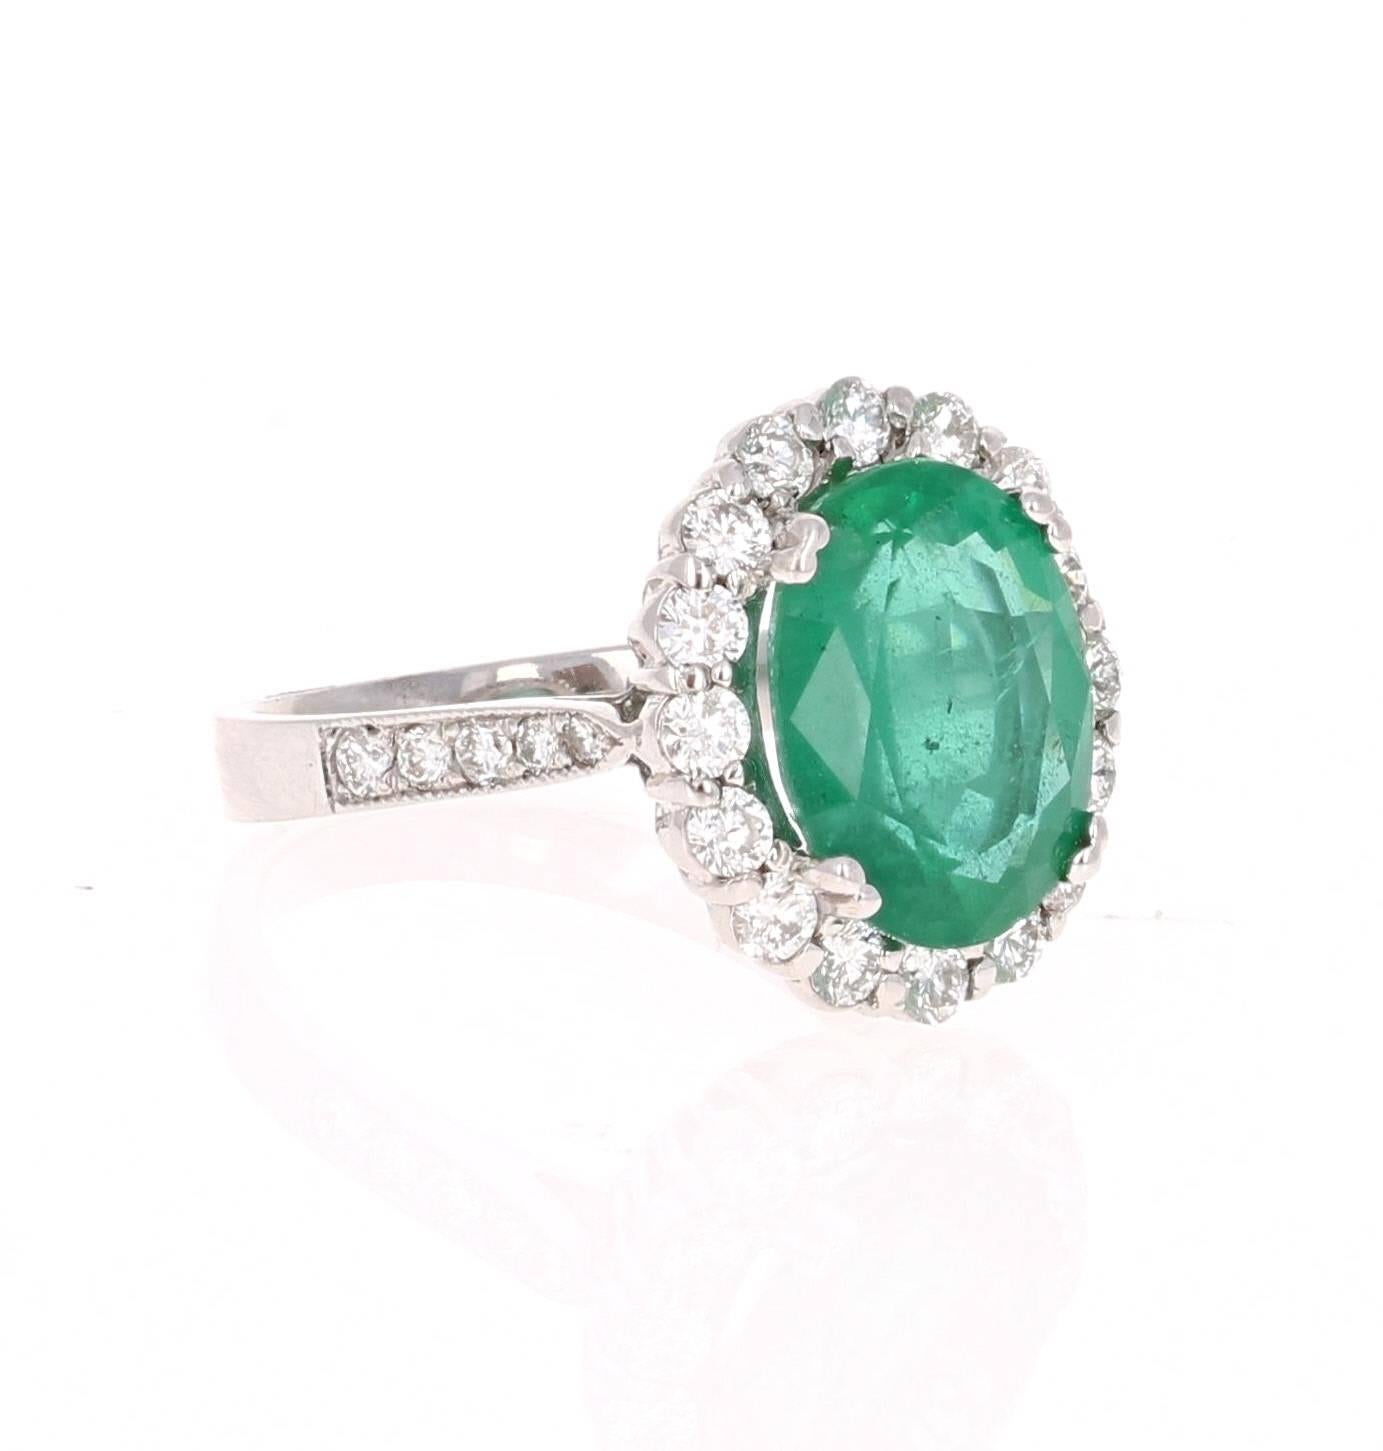 This is a gorgeous, gorgeous, gorgeous Emerald and Diamond Ring!  This 14K White Gold Ring has an Oval Cut Emerald that weighs 4.38 carats and is surrounded by a Halo of 26 Round Cut Diamonds that weigh 1.01 carat (Clarity: SI2, Color: F).  The